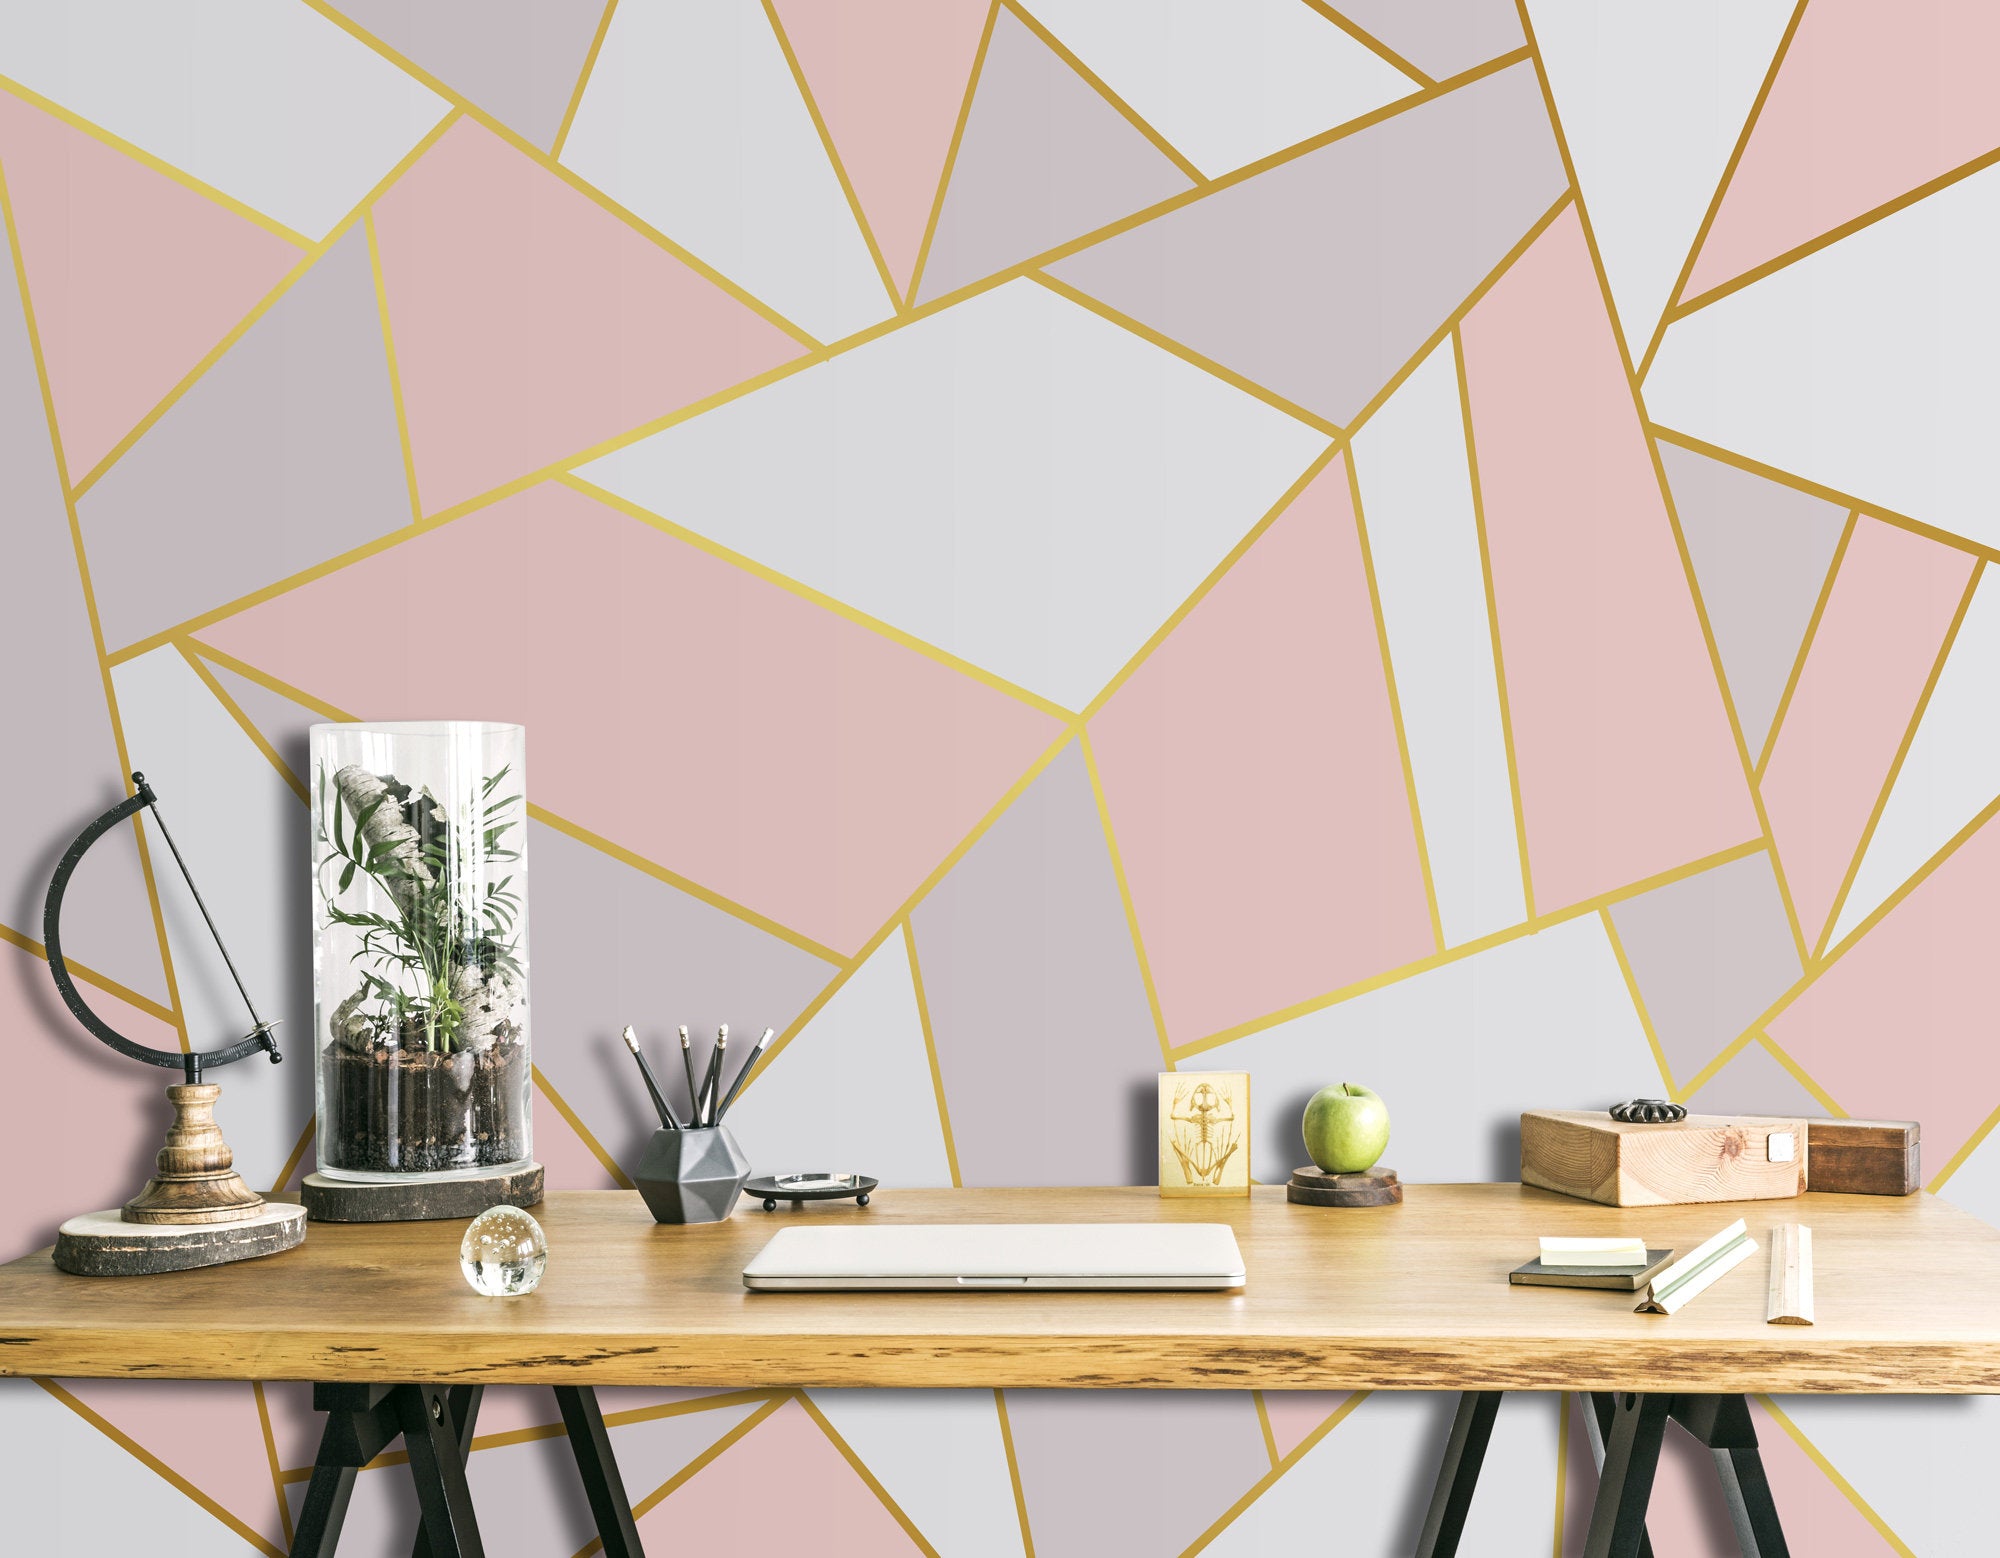 Triagle And Trapezoid Geometric Shapes Design Wallpaper